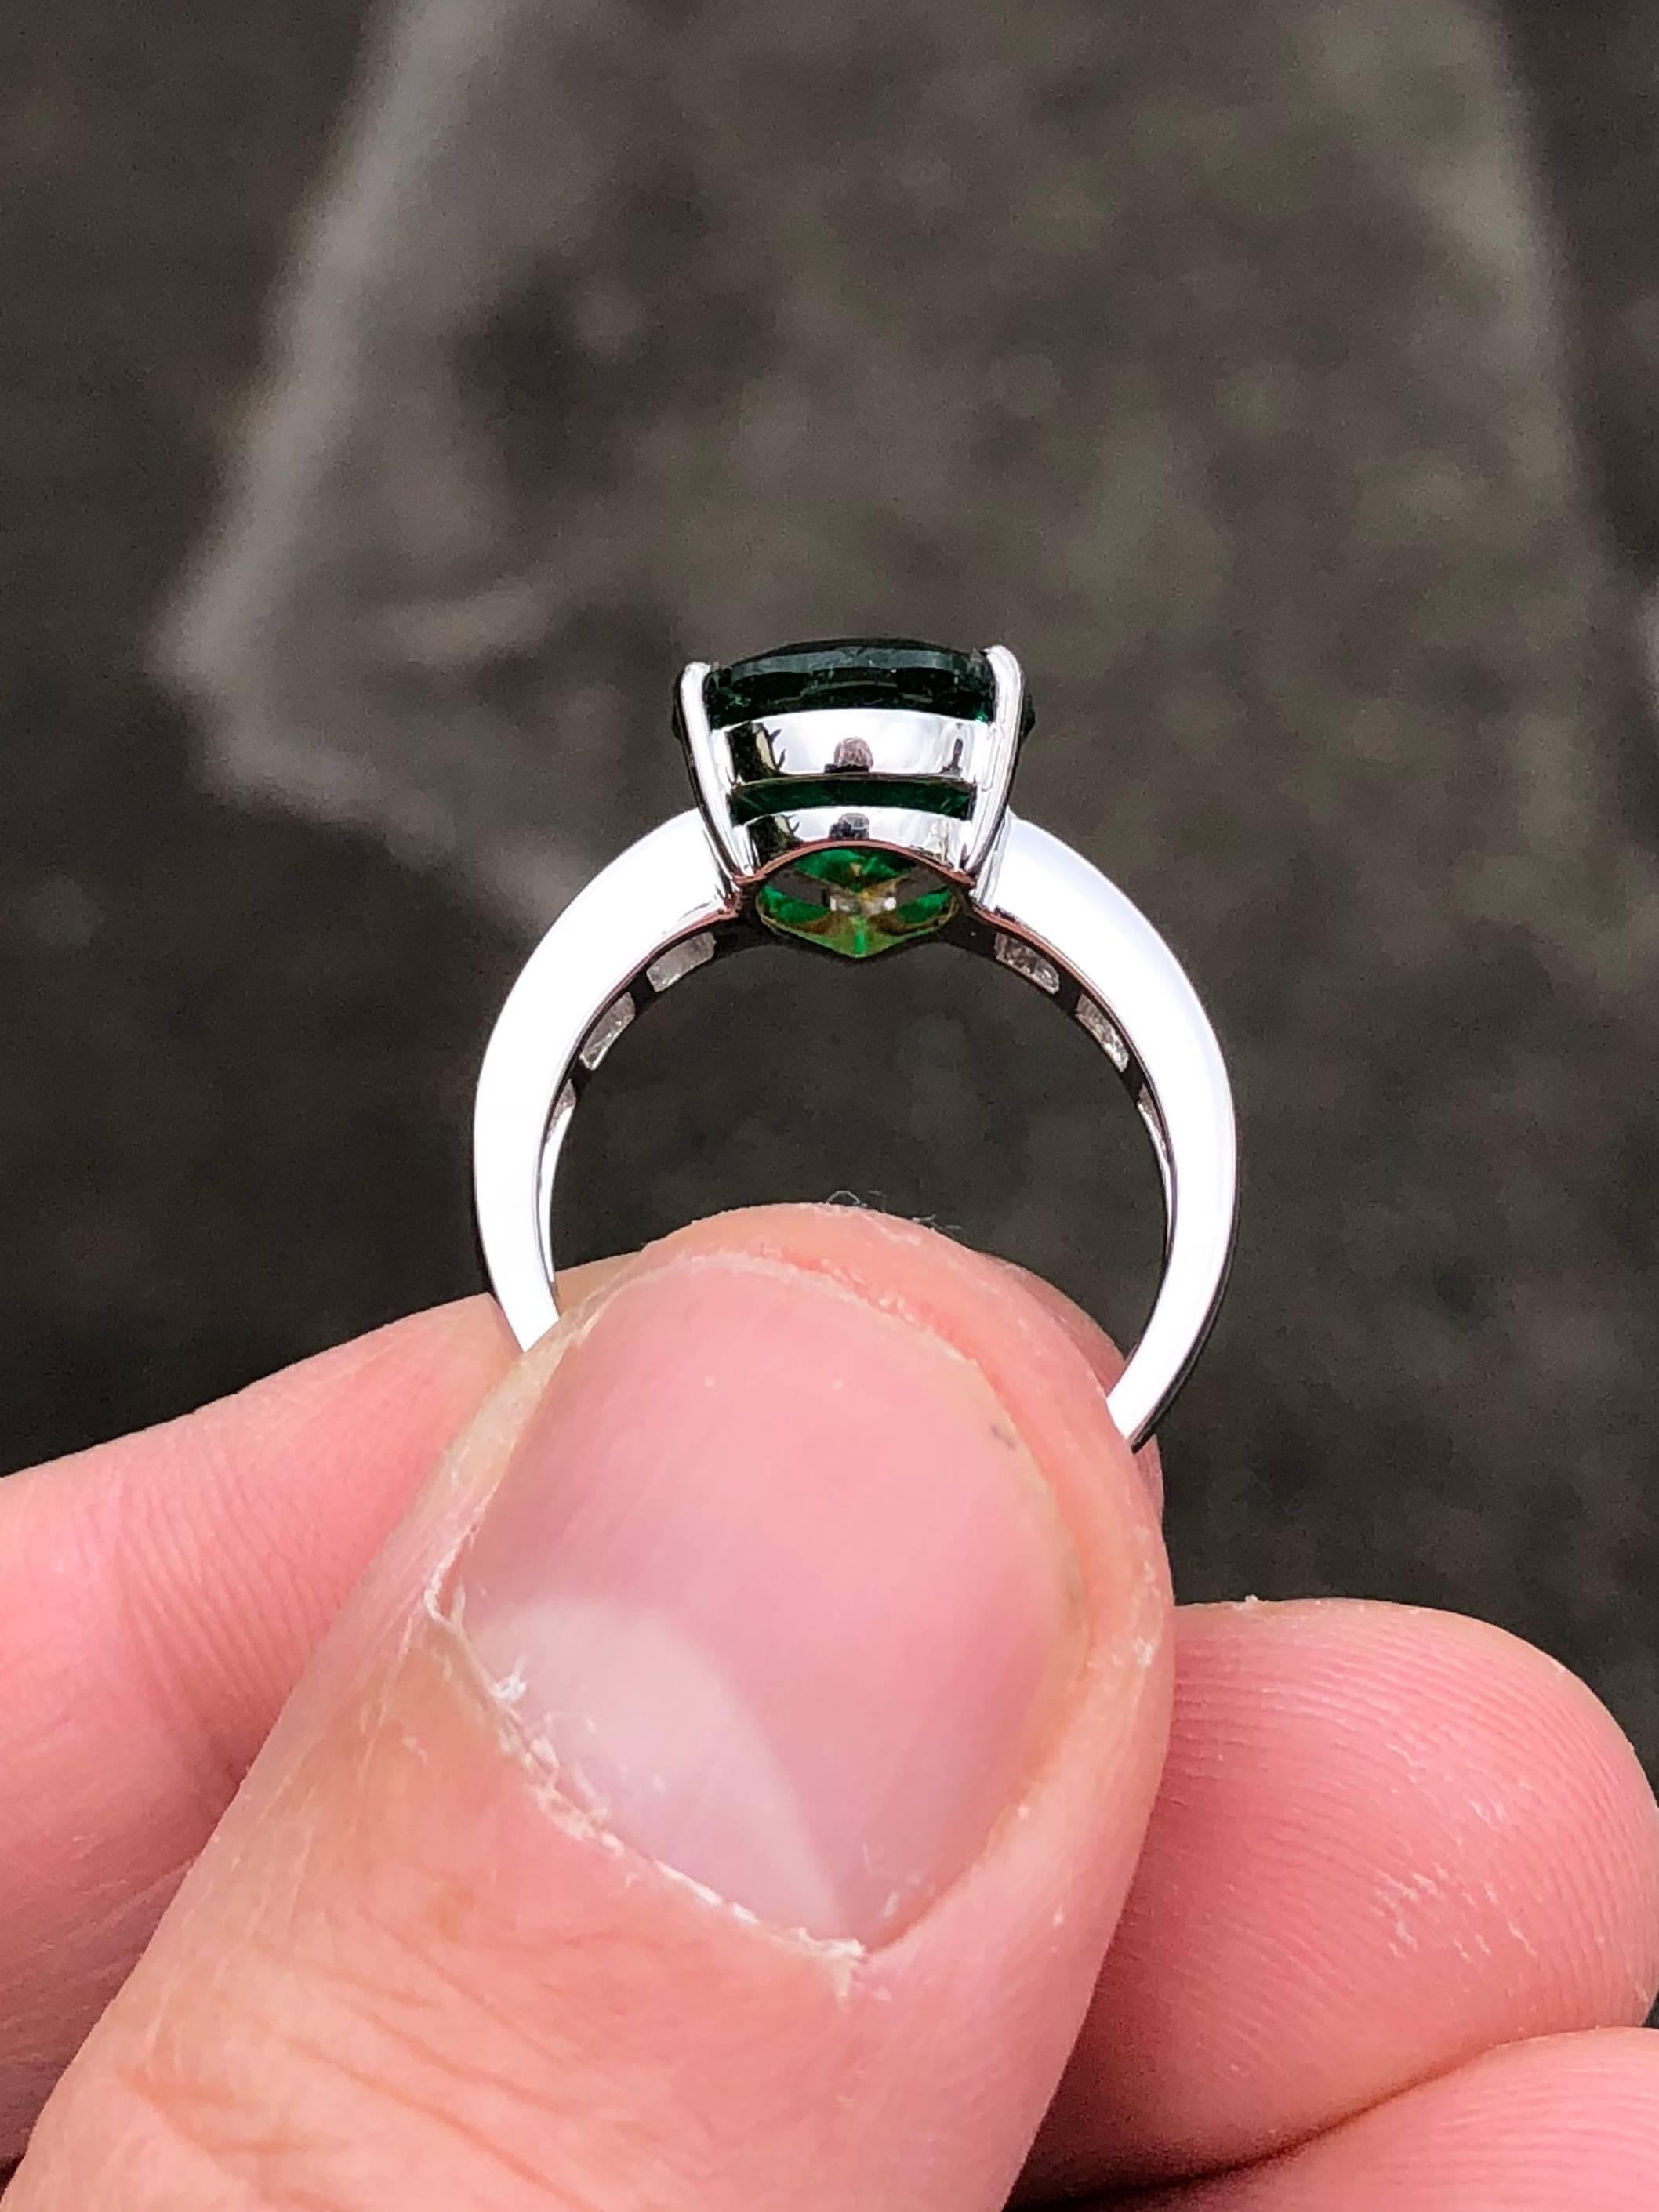 The centre stone is a beautiful 4 carat, fine Muzo Colombian emerald, certified by Gübelin Gem Lab, Lucerne, Switzerland.  This piece is decorated with certified E colour, baguette cut diamonds and set in 18K white gold.